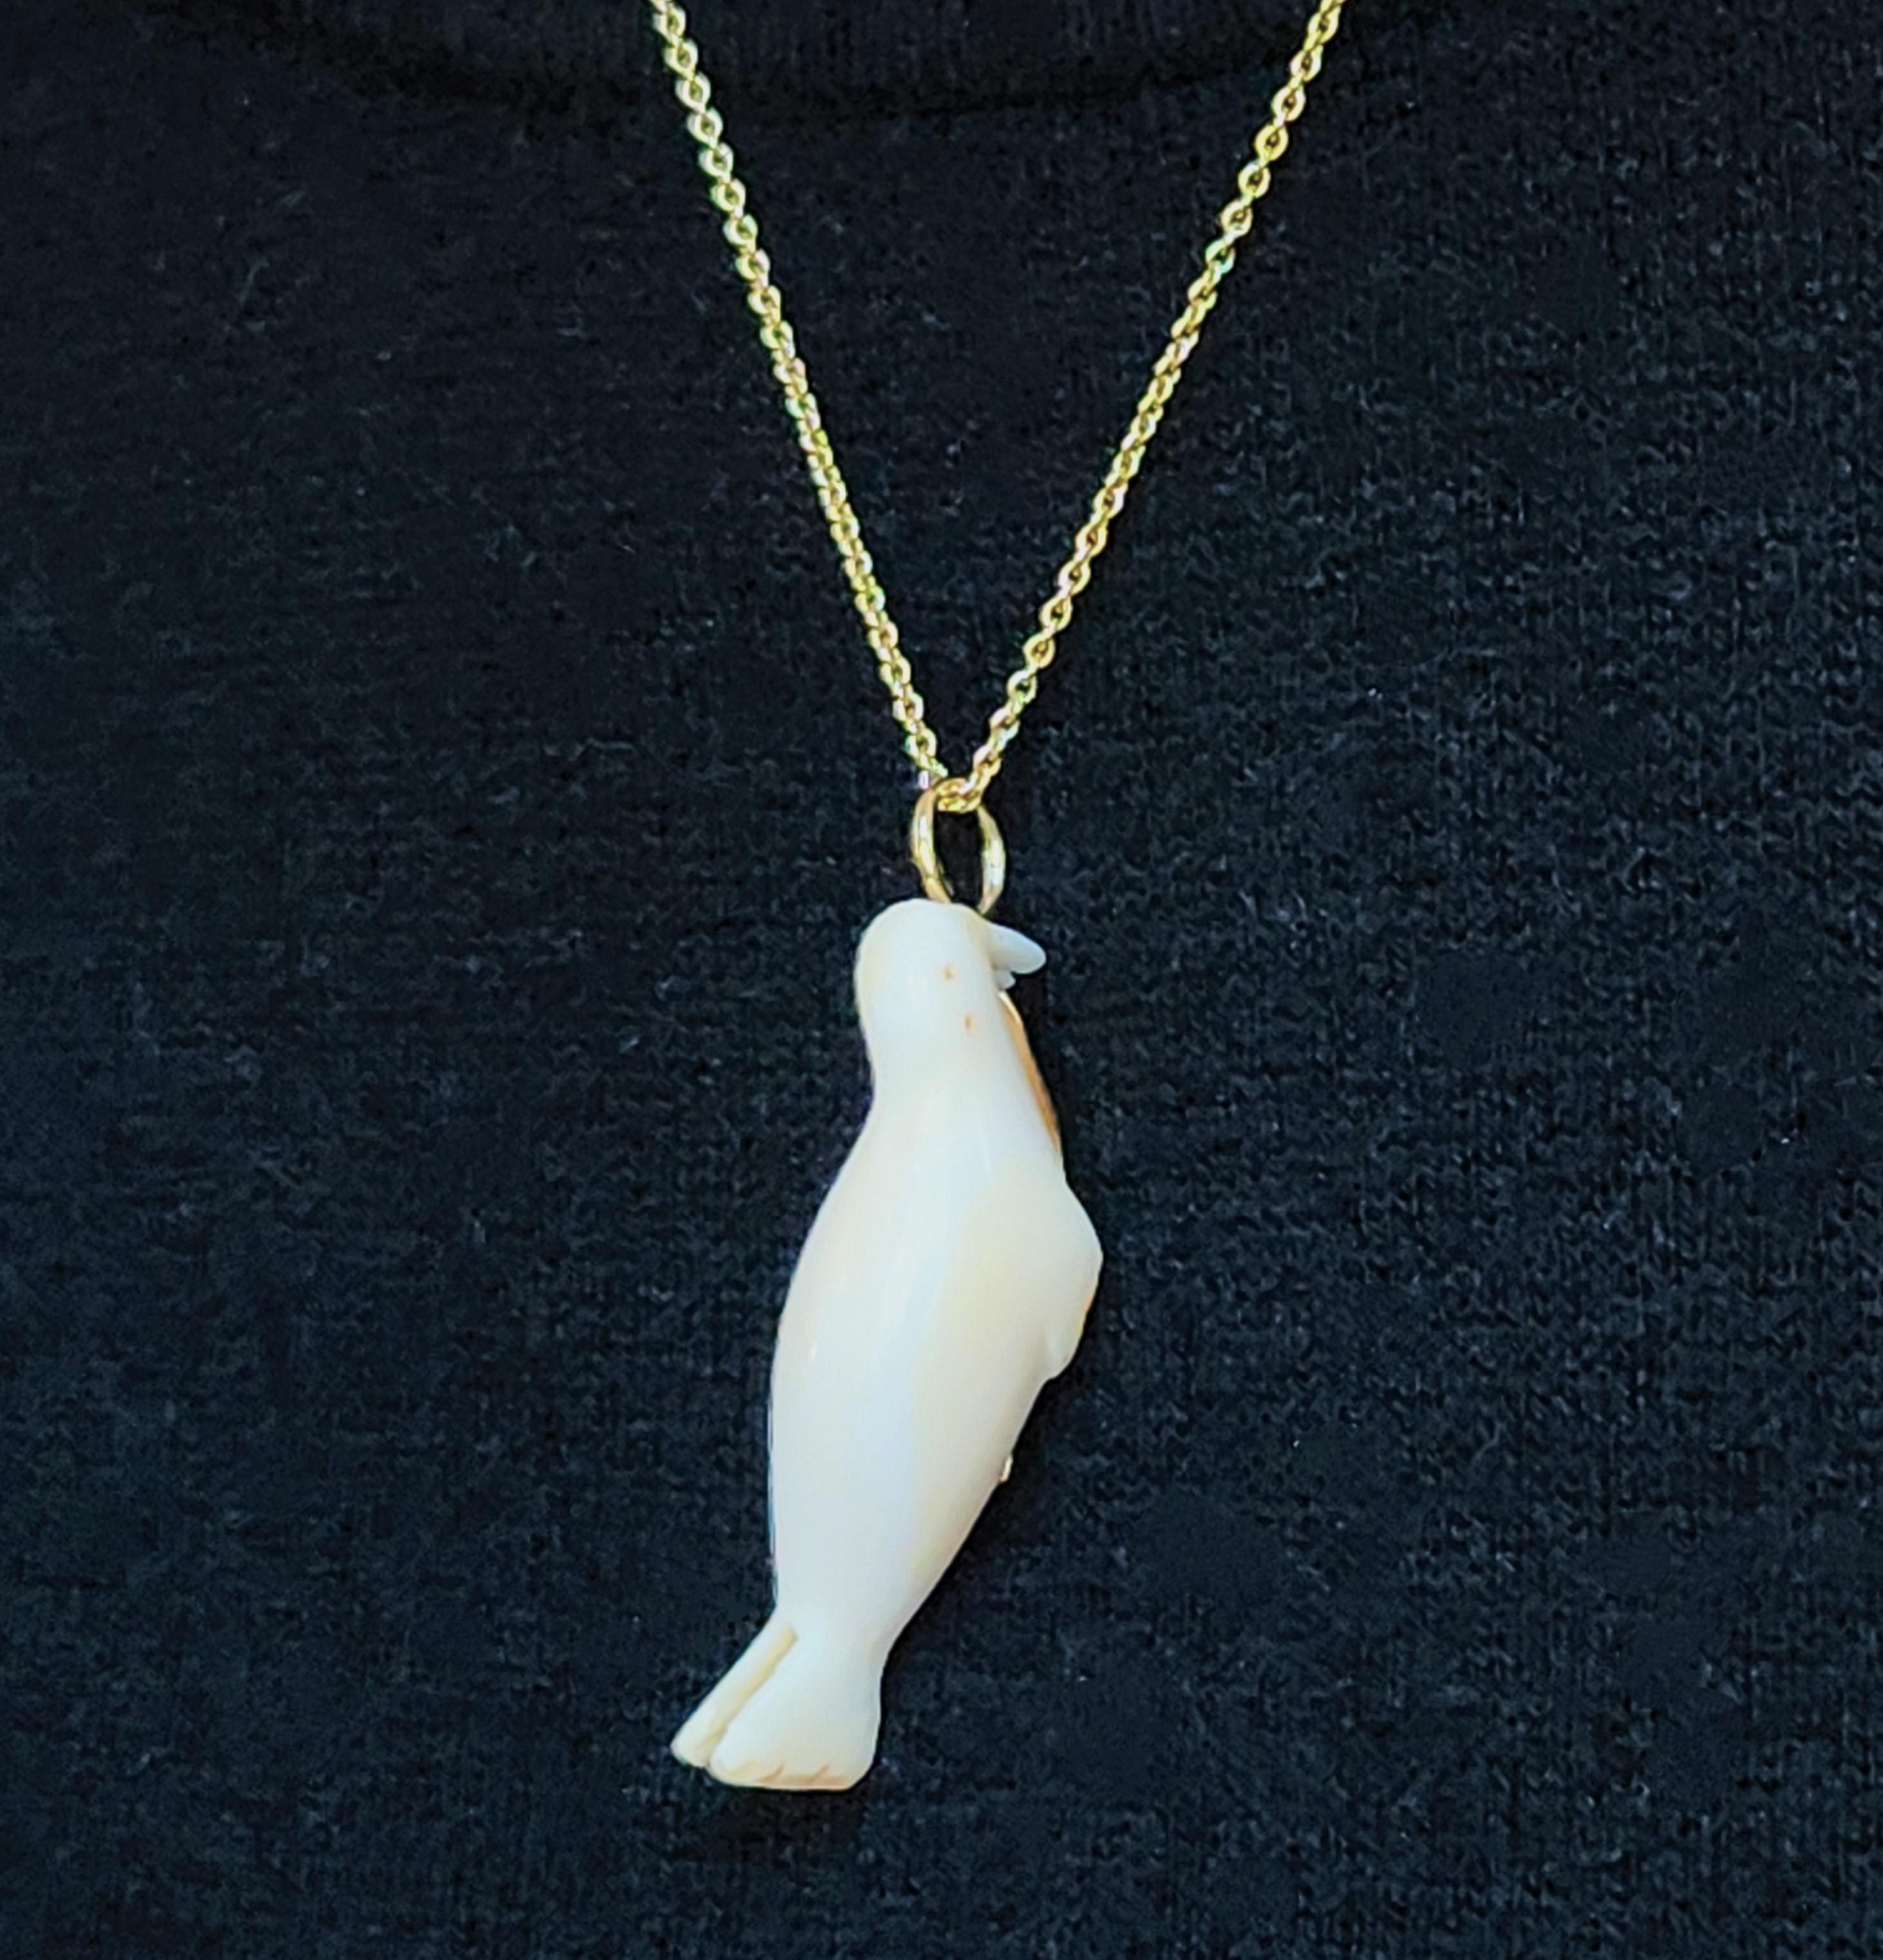 Vintage likely Inuit hand carving of a walrus one of a kind necklace in 18K. Natural simplicity designed pendant necklace that cherishes indigenous people who protect the earth and this small collection is an homage to the North American Inuits that